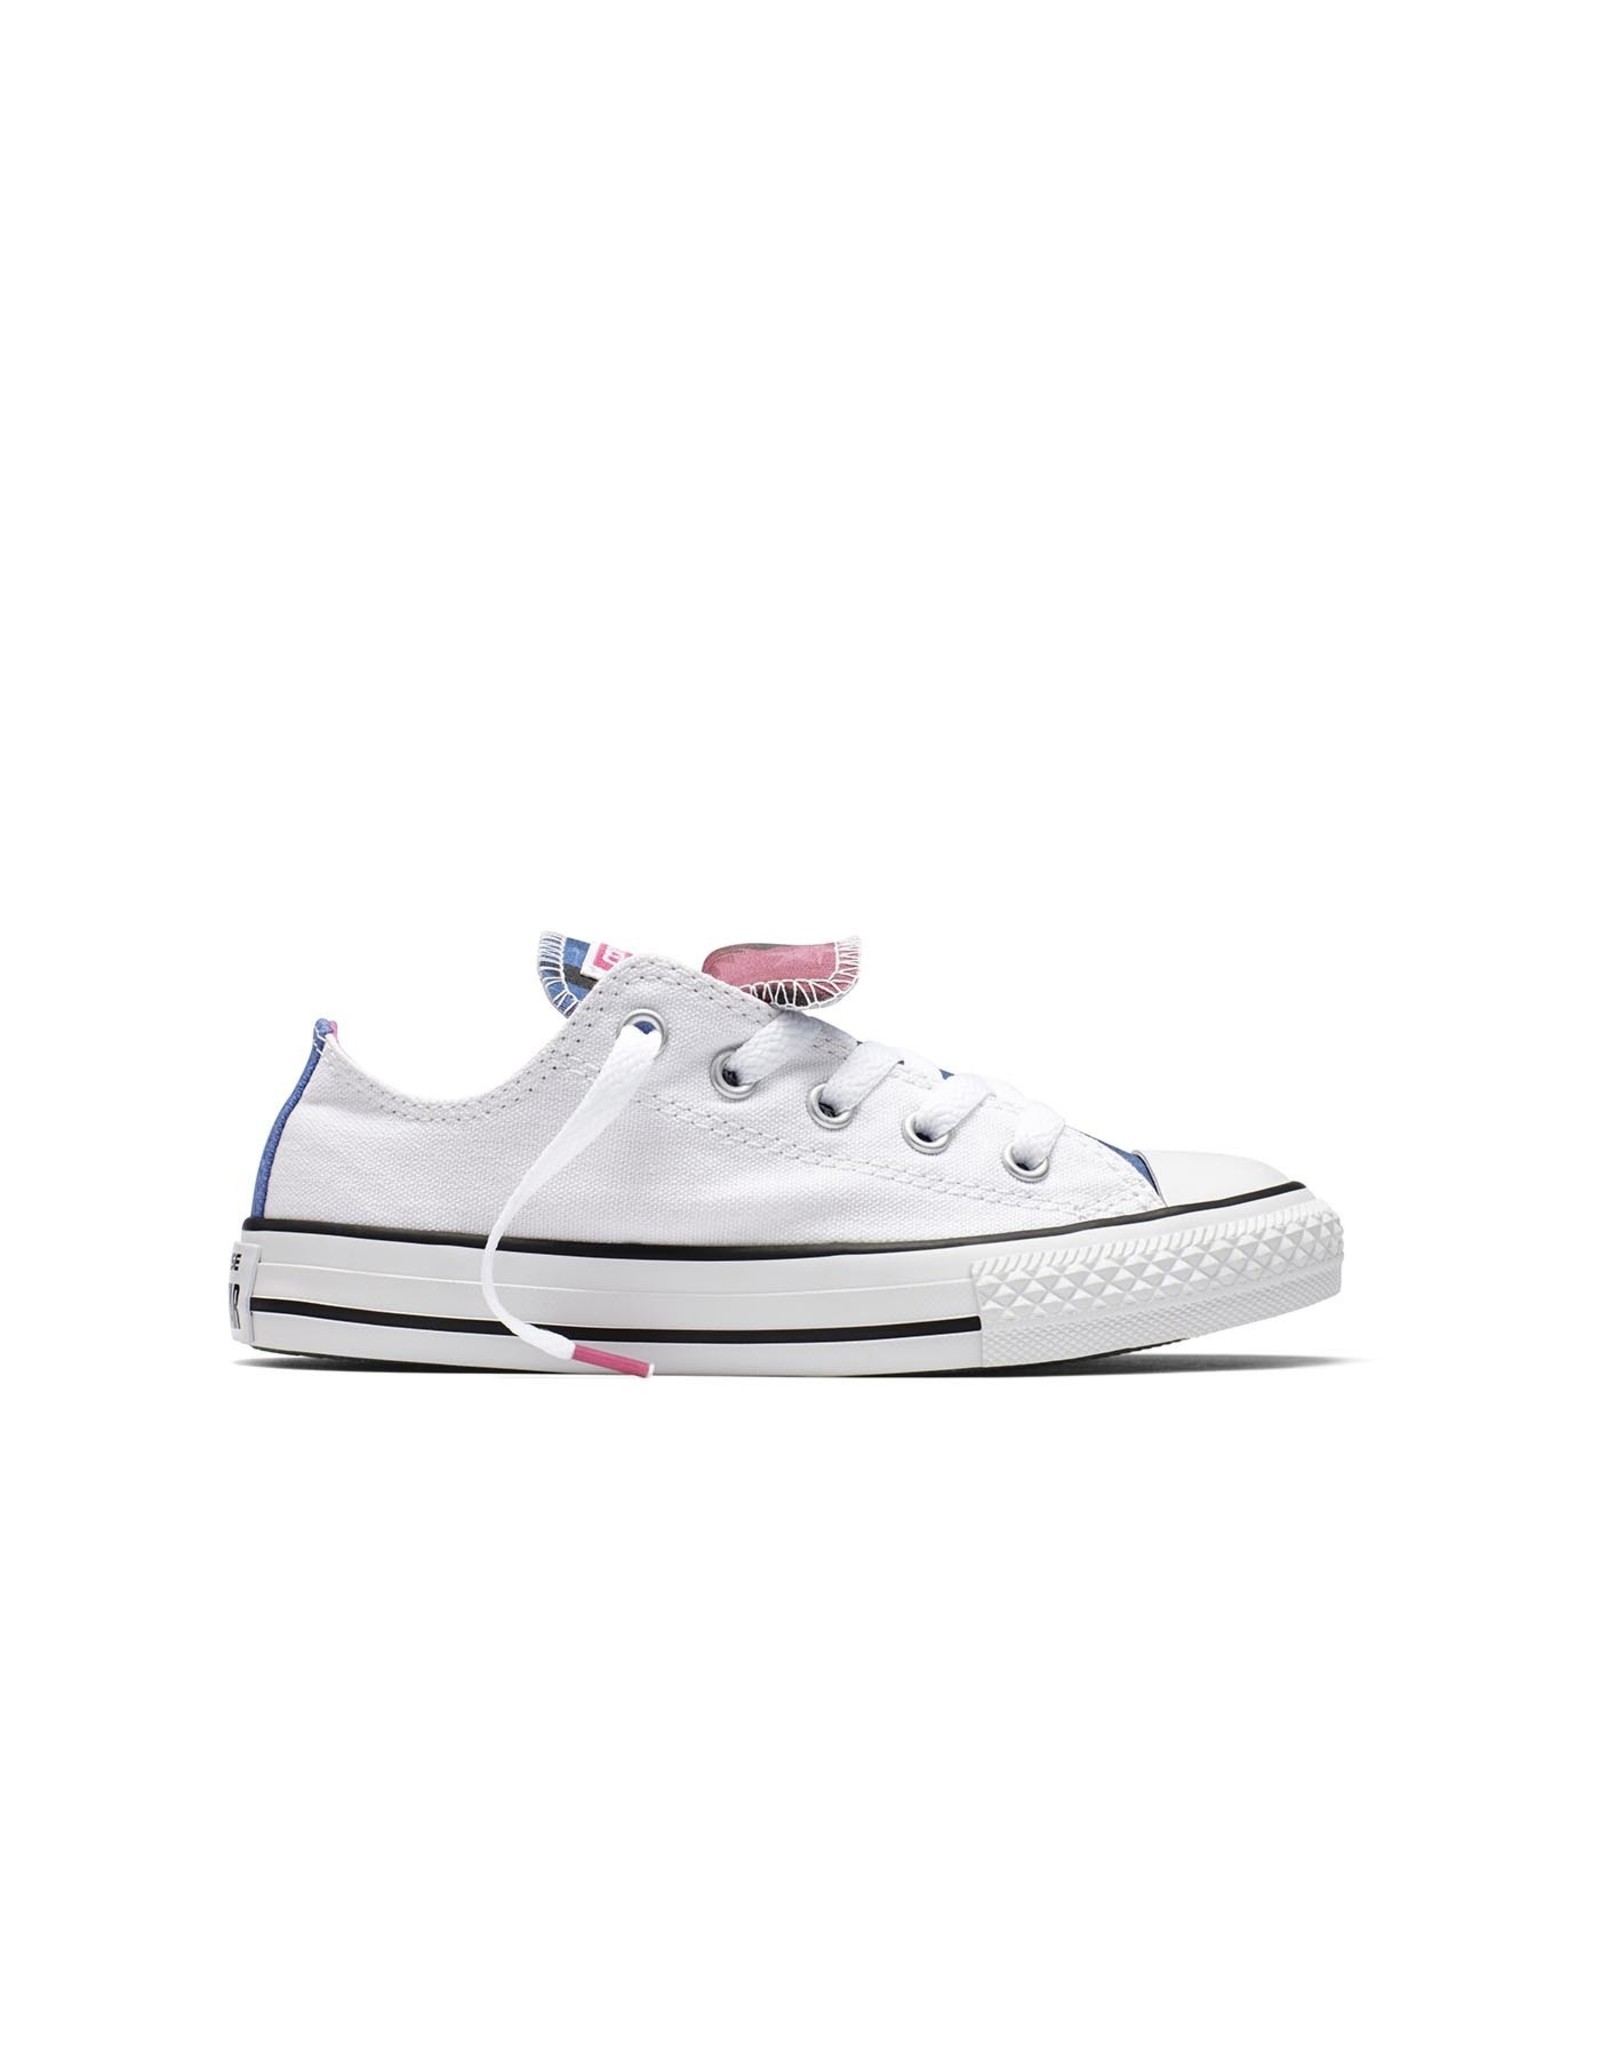 CHUCK TAYLOR DOUBLE TONGUE OX WHITE/PINK/WHITE CVDW-654339C